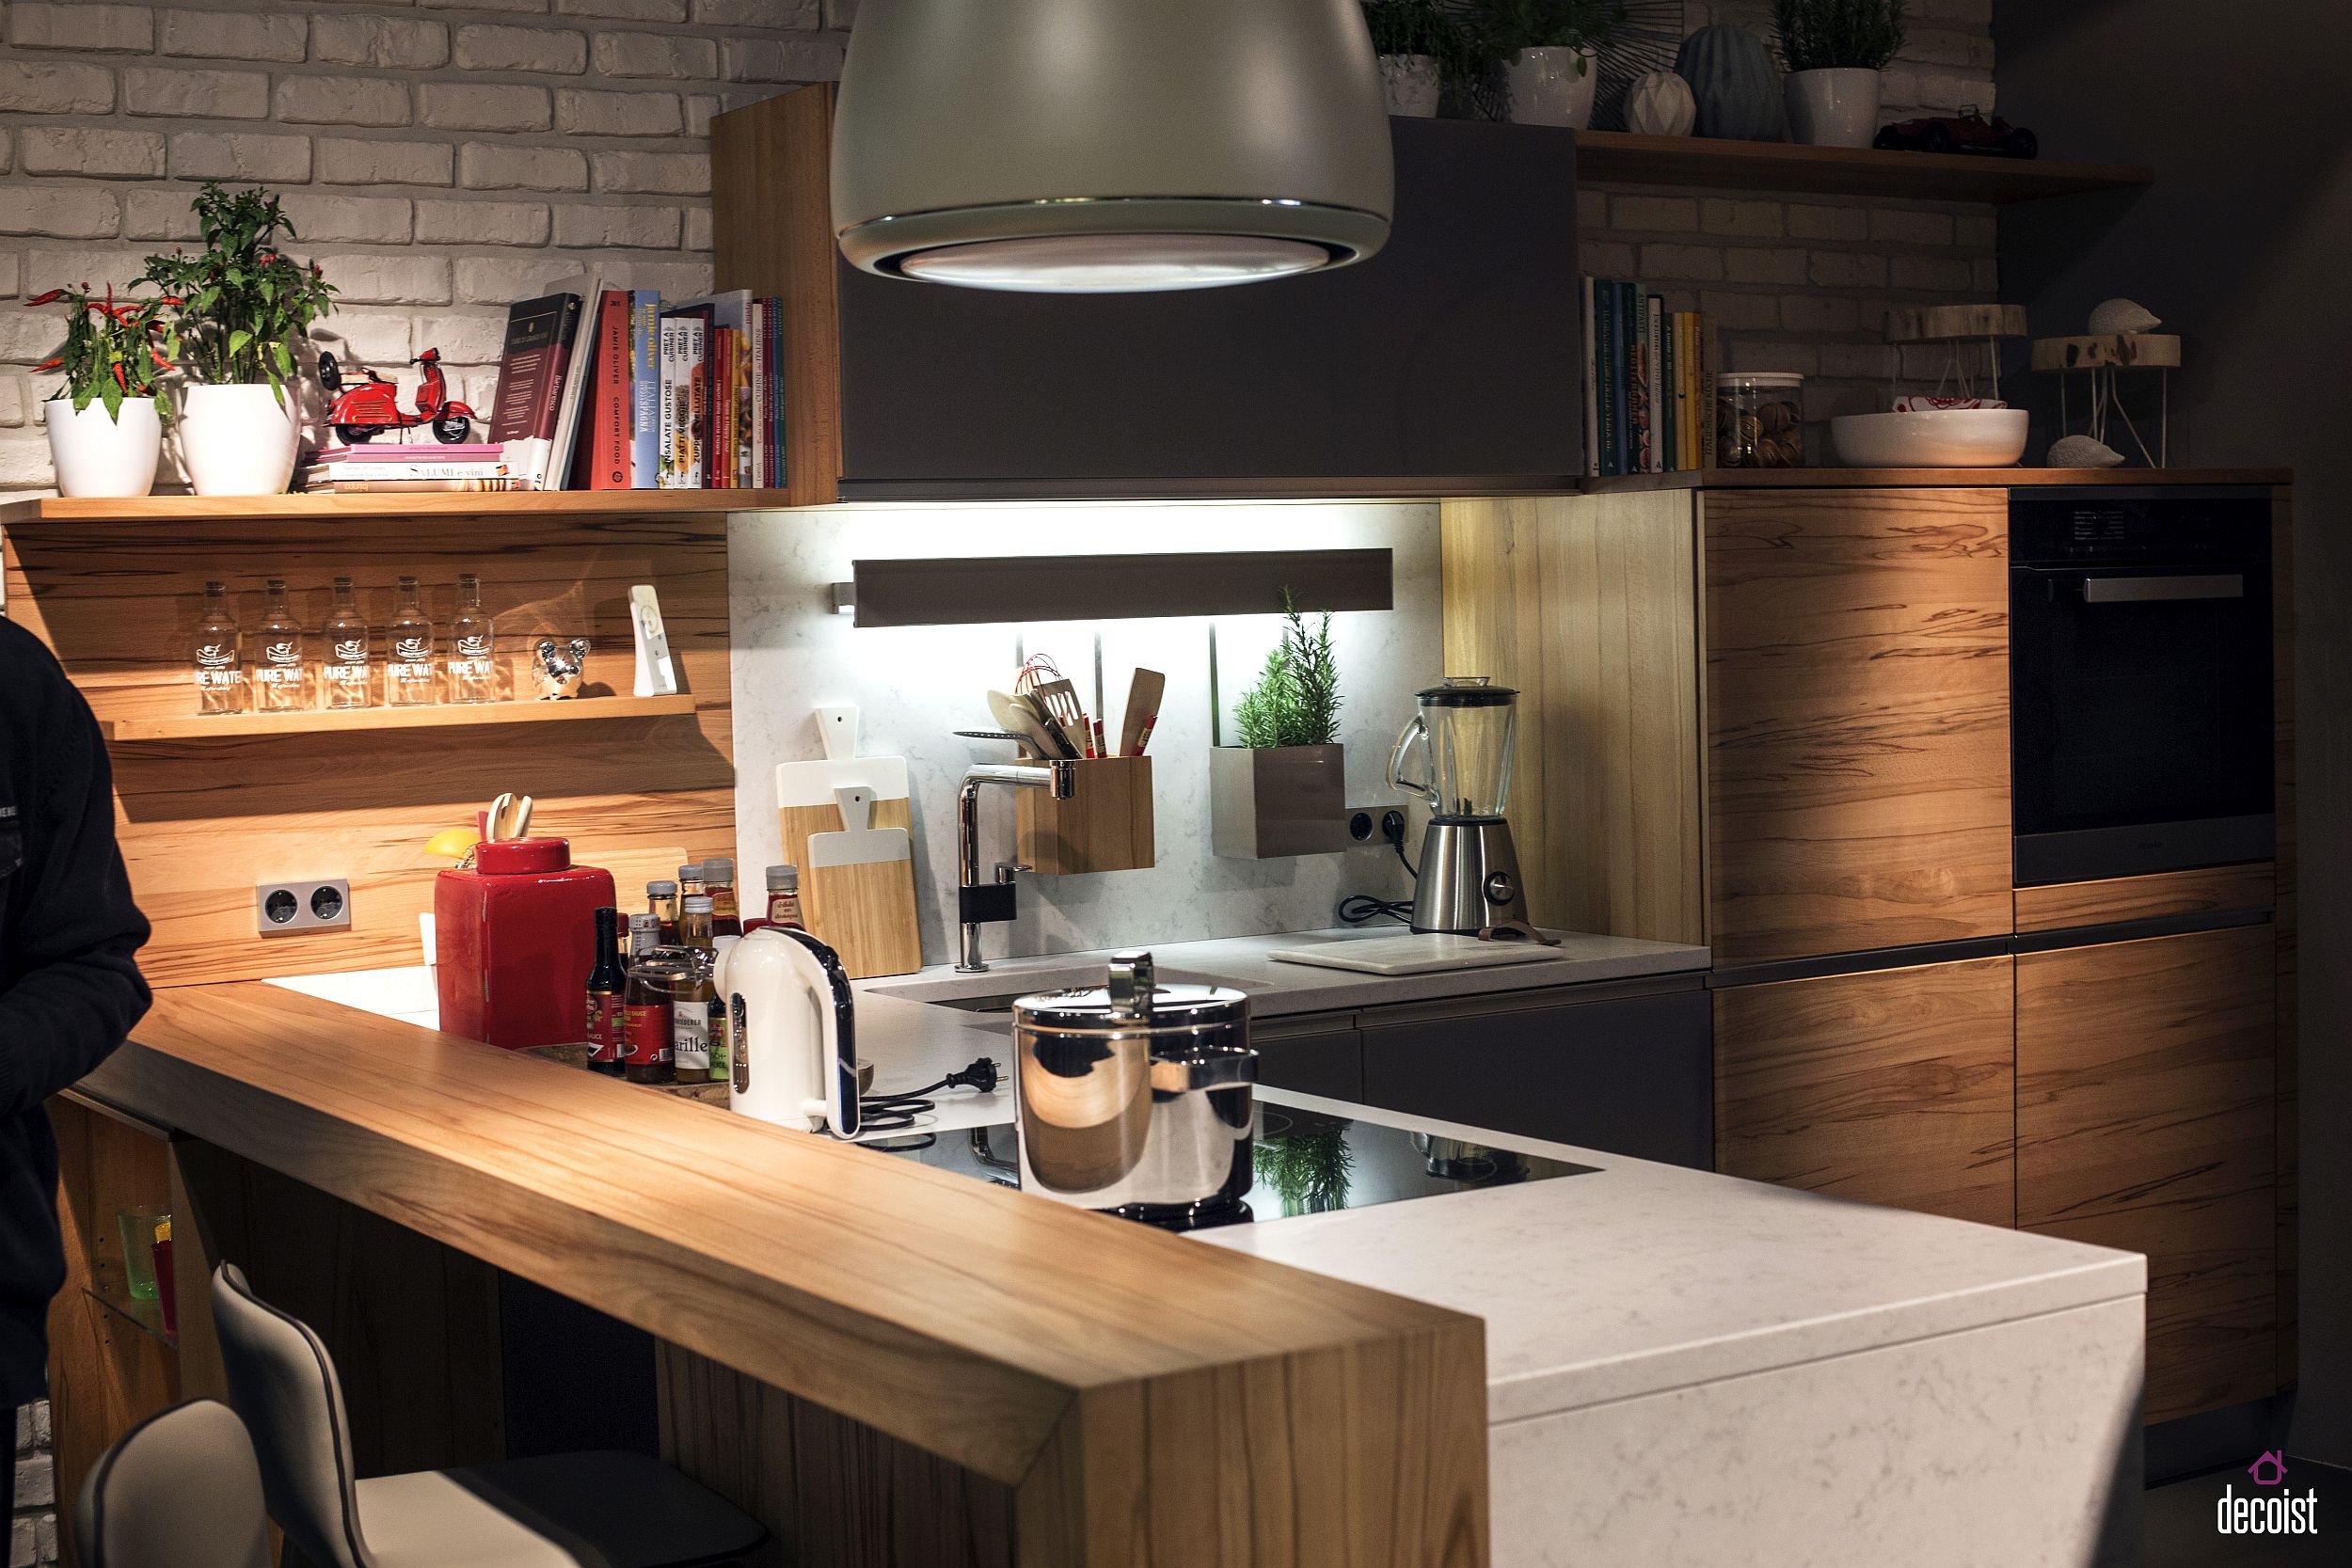 Wooden-breakfast-bar-seems-like-a-visual-extension-of-the-kitchen-shelves-and-the-worktop